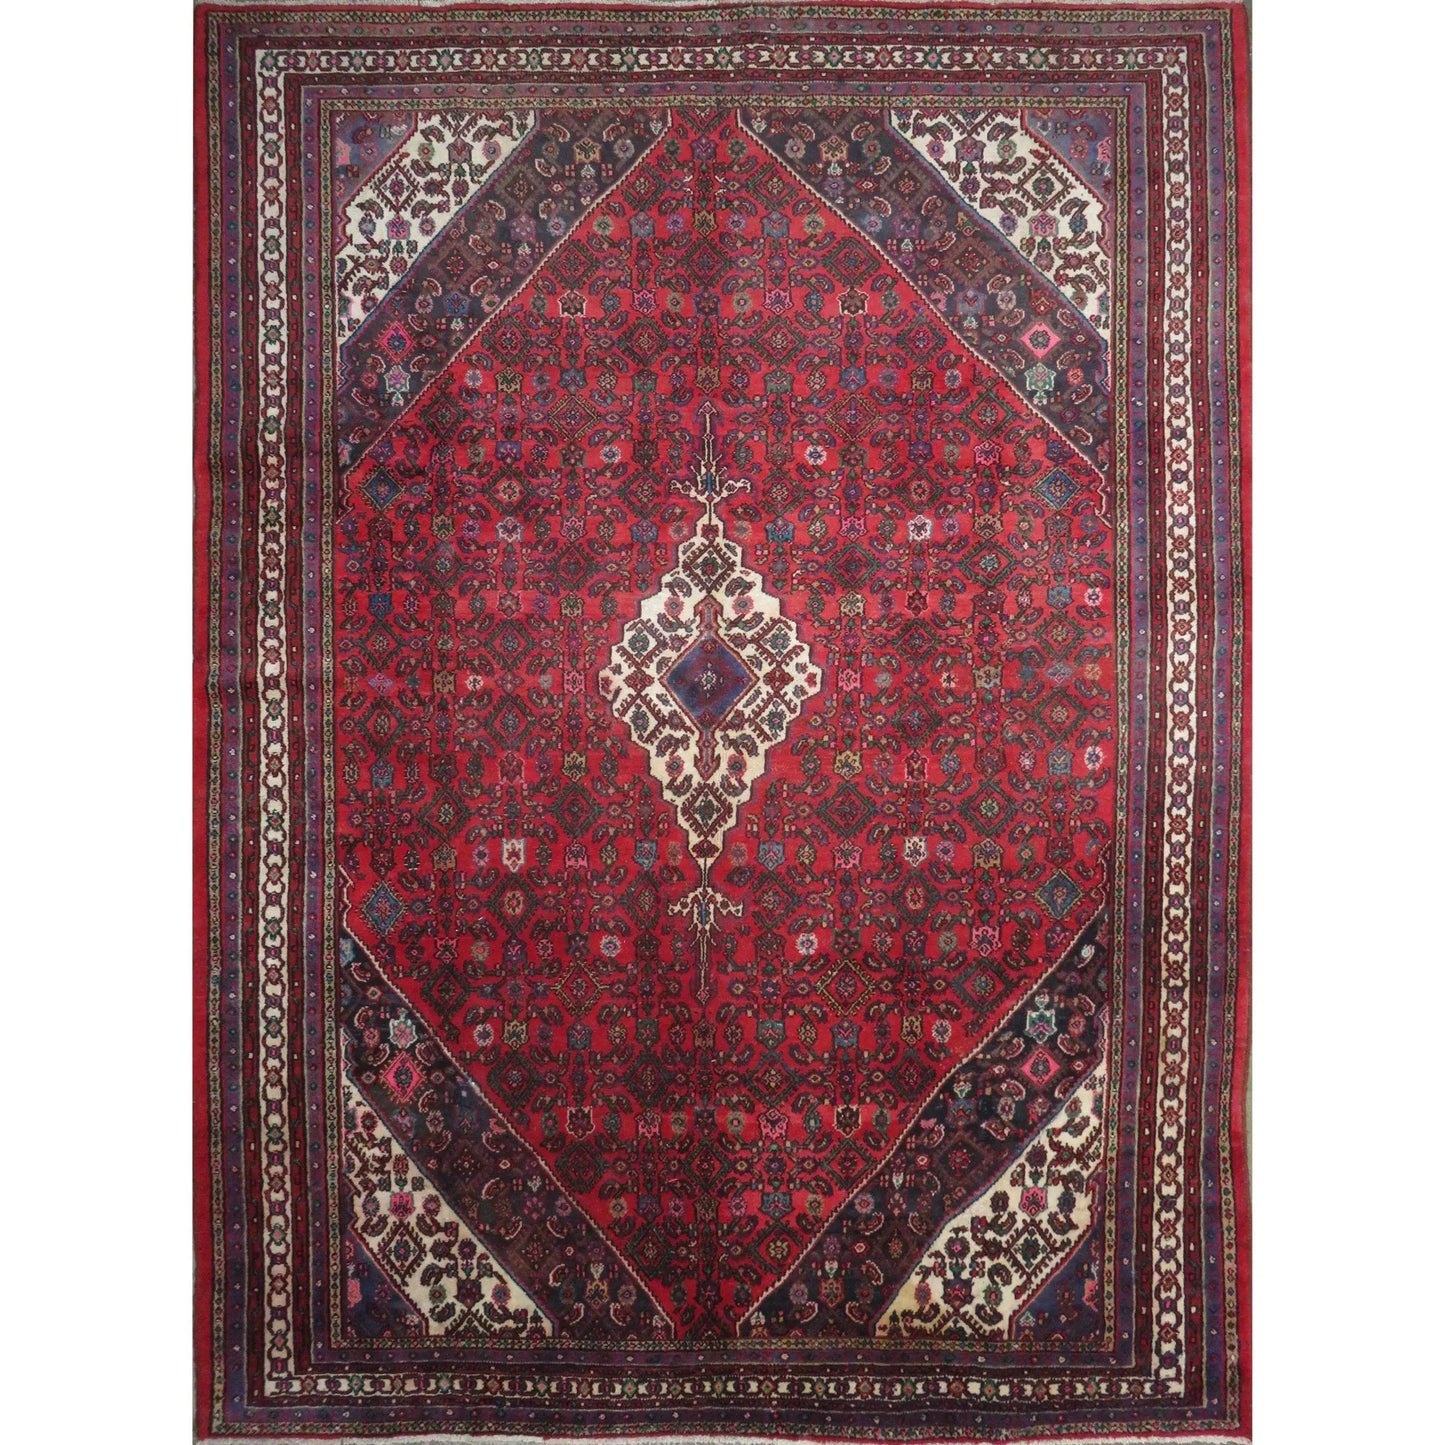 Hand-Knotted Vintage Rug 11'9" x 8'3"